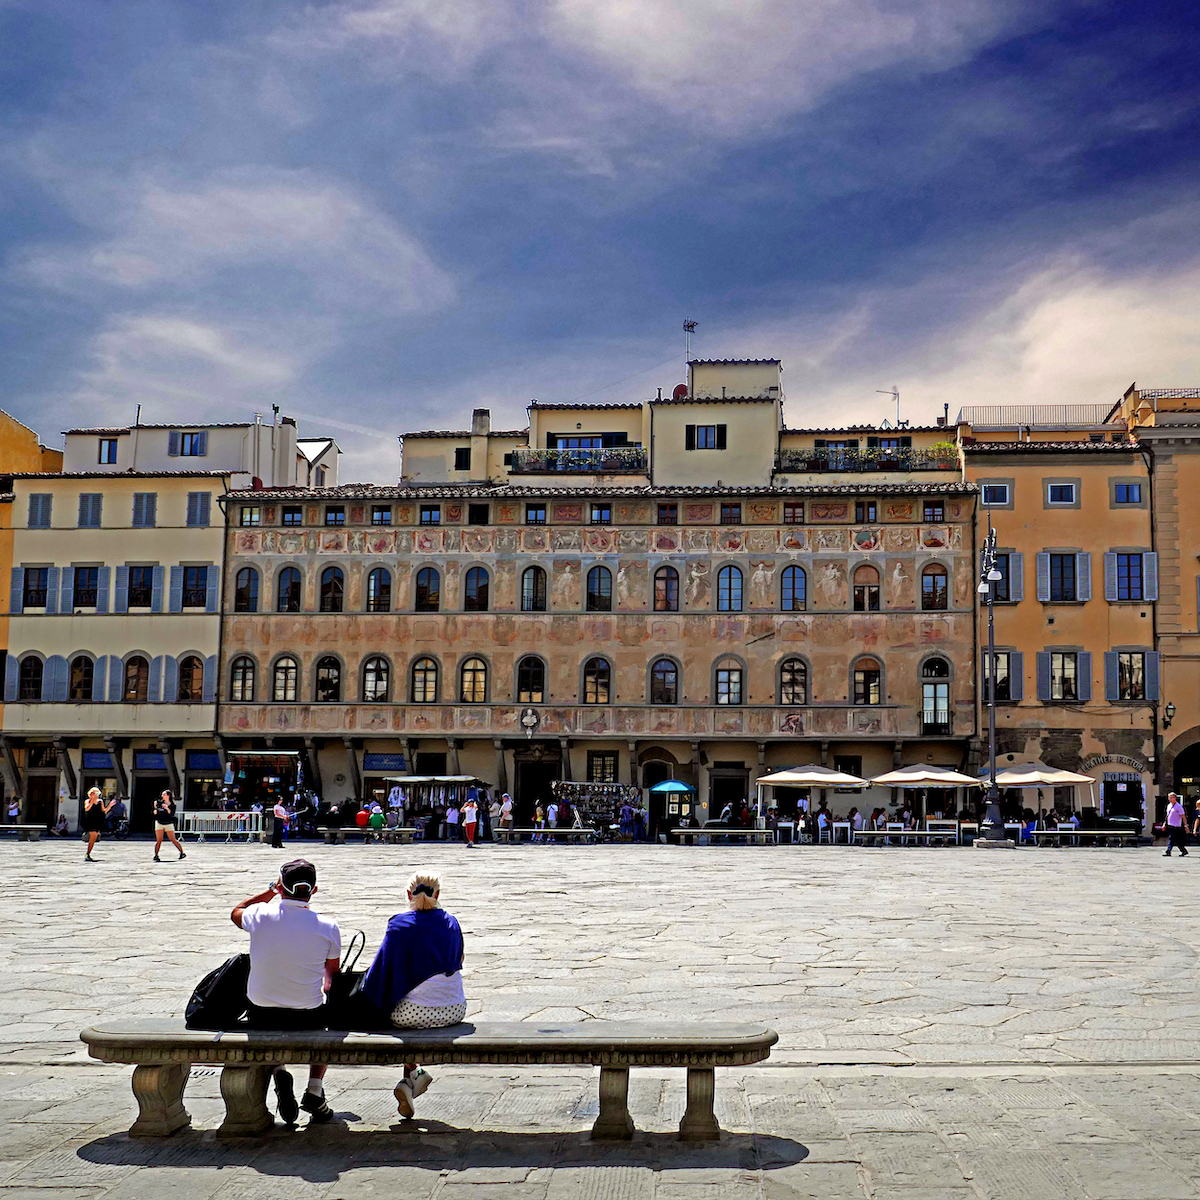 Large open square in Florence, Italy with two people sitting on a stone bench in the foreground.